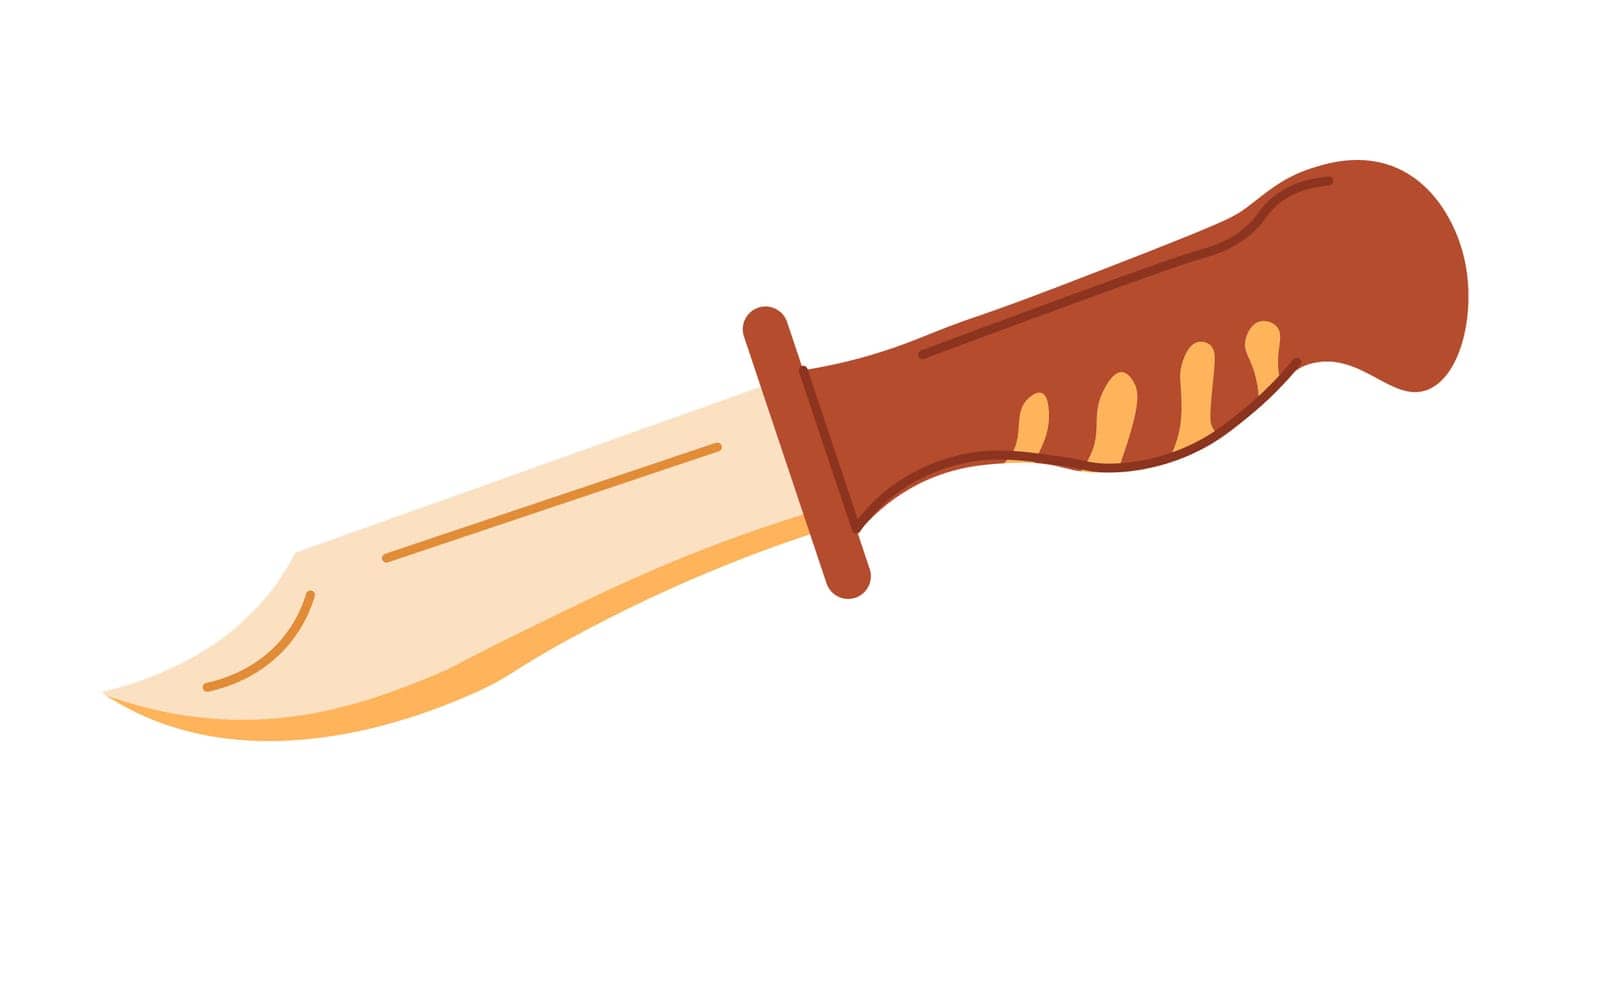 Knife with handle, traveling kit or tools vector by Sonulkaster